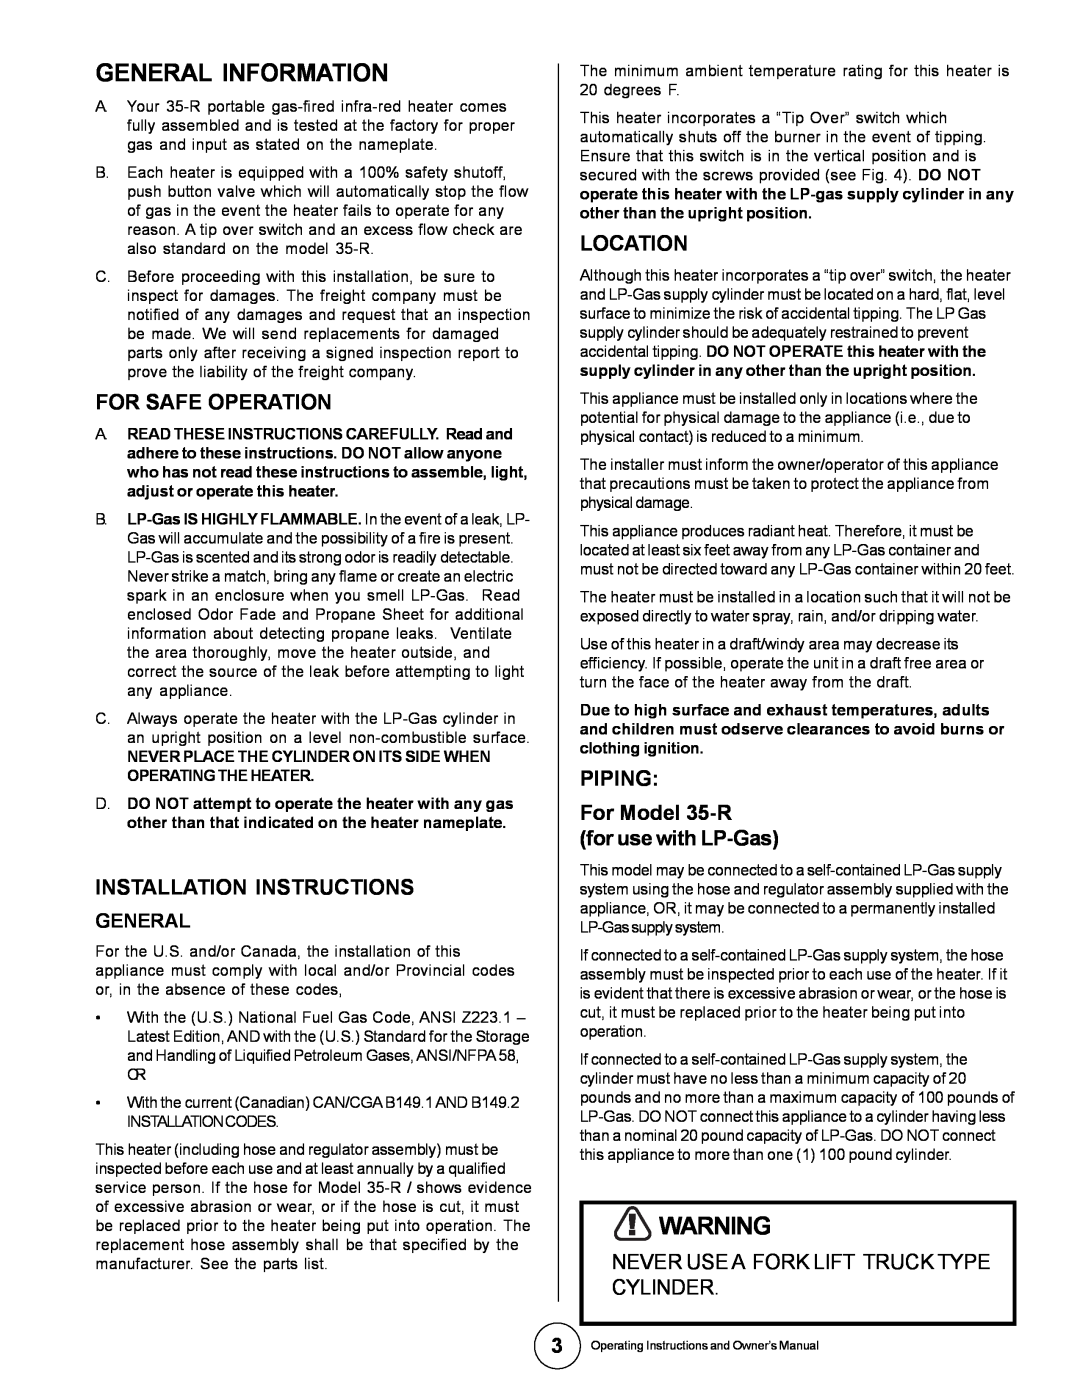 Universal 35-R owner manual General Information, For Safe Operation, Installation Instructions, Location 